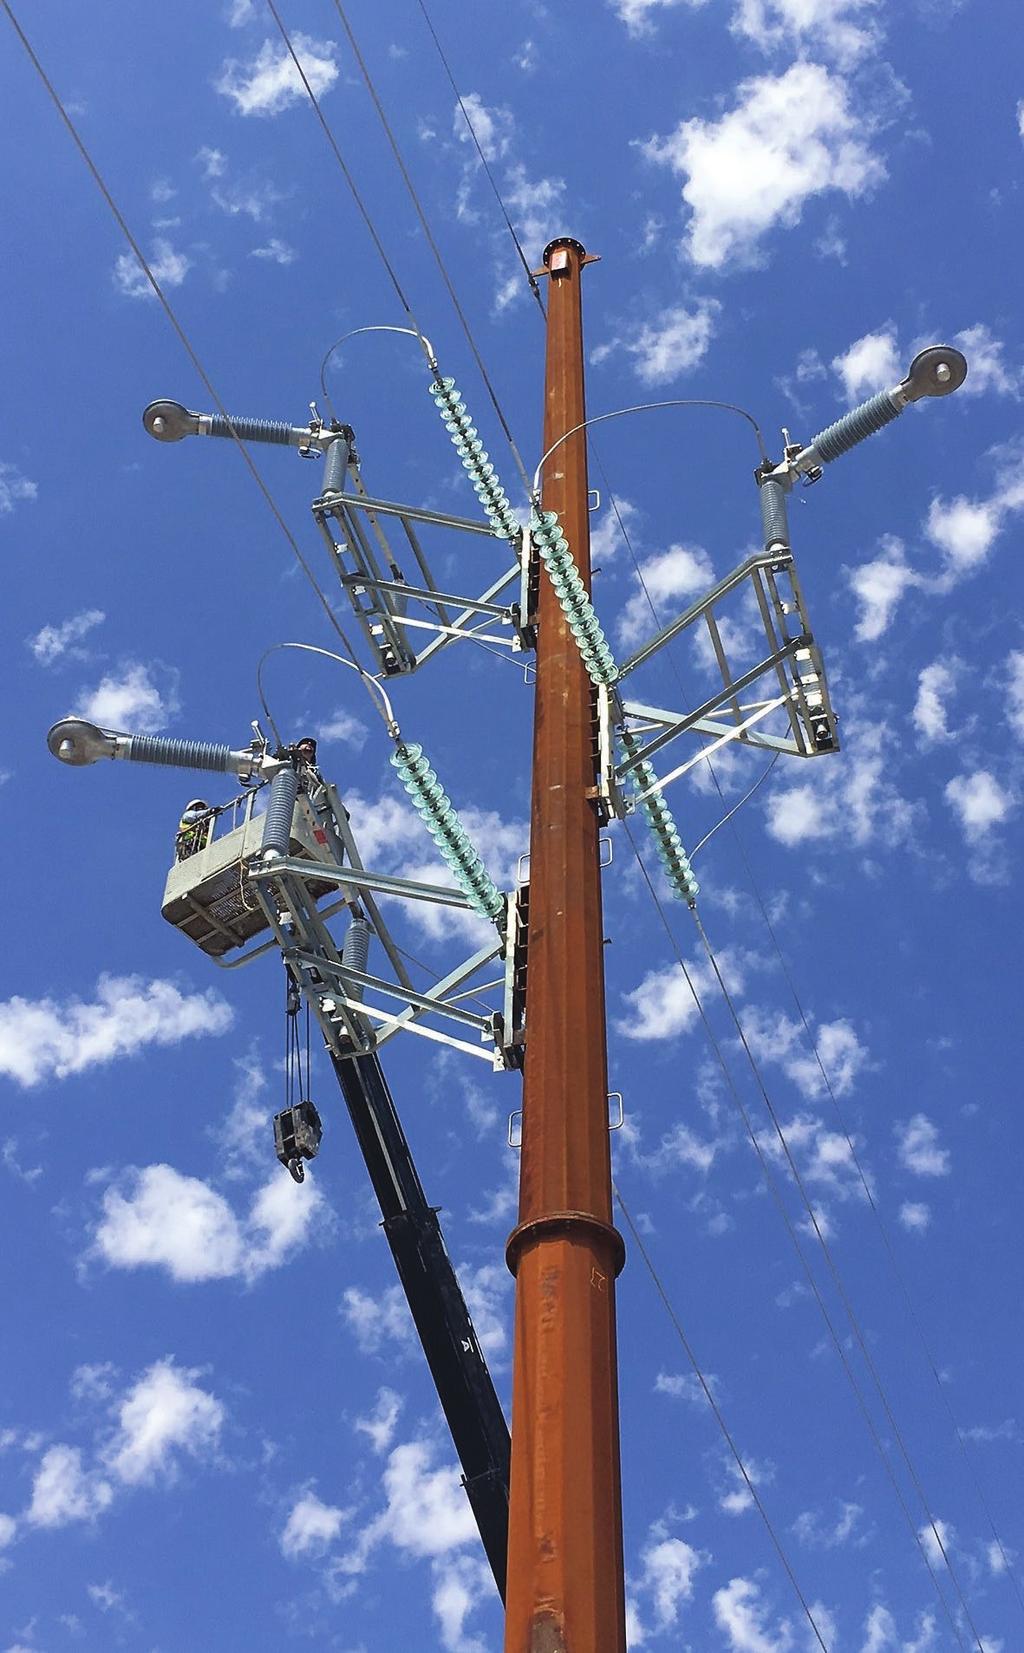 CATALOG BULLETIN GENERAL APPLICATION Southern States supplies a wide offering of Transmission Switching solutions in response to an increasing need for improved system reliability and reduced